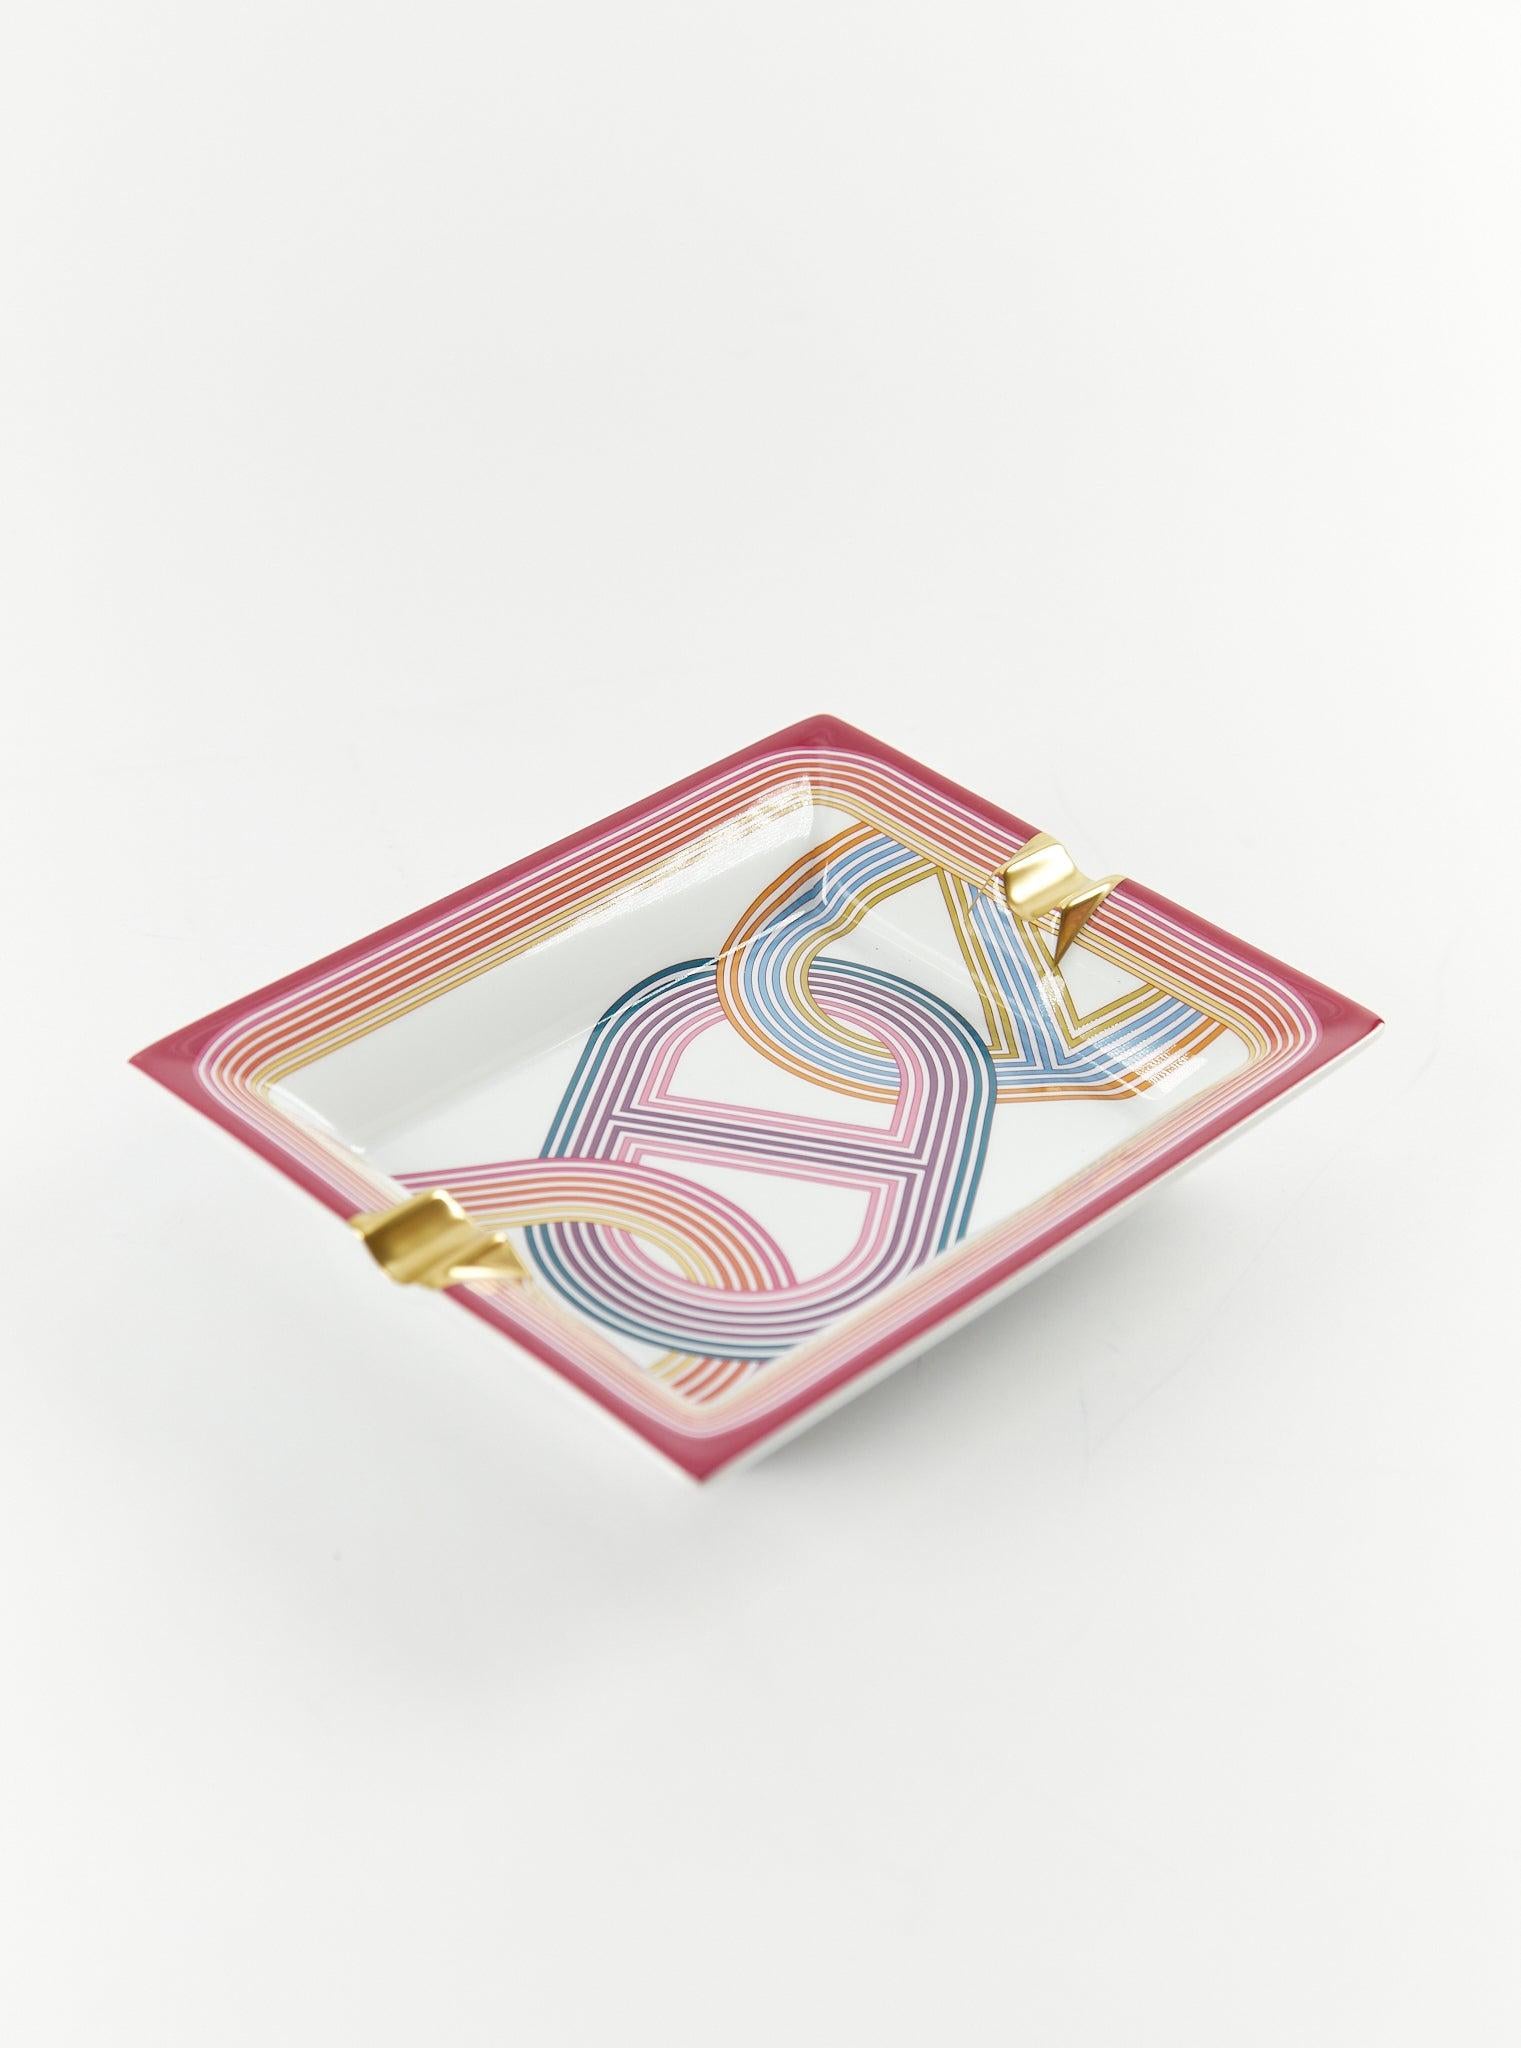 Hermès ashtray in porcelain with hand painted gold trim and velvet goatskin base

Decorated using chromolithography

